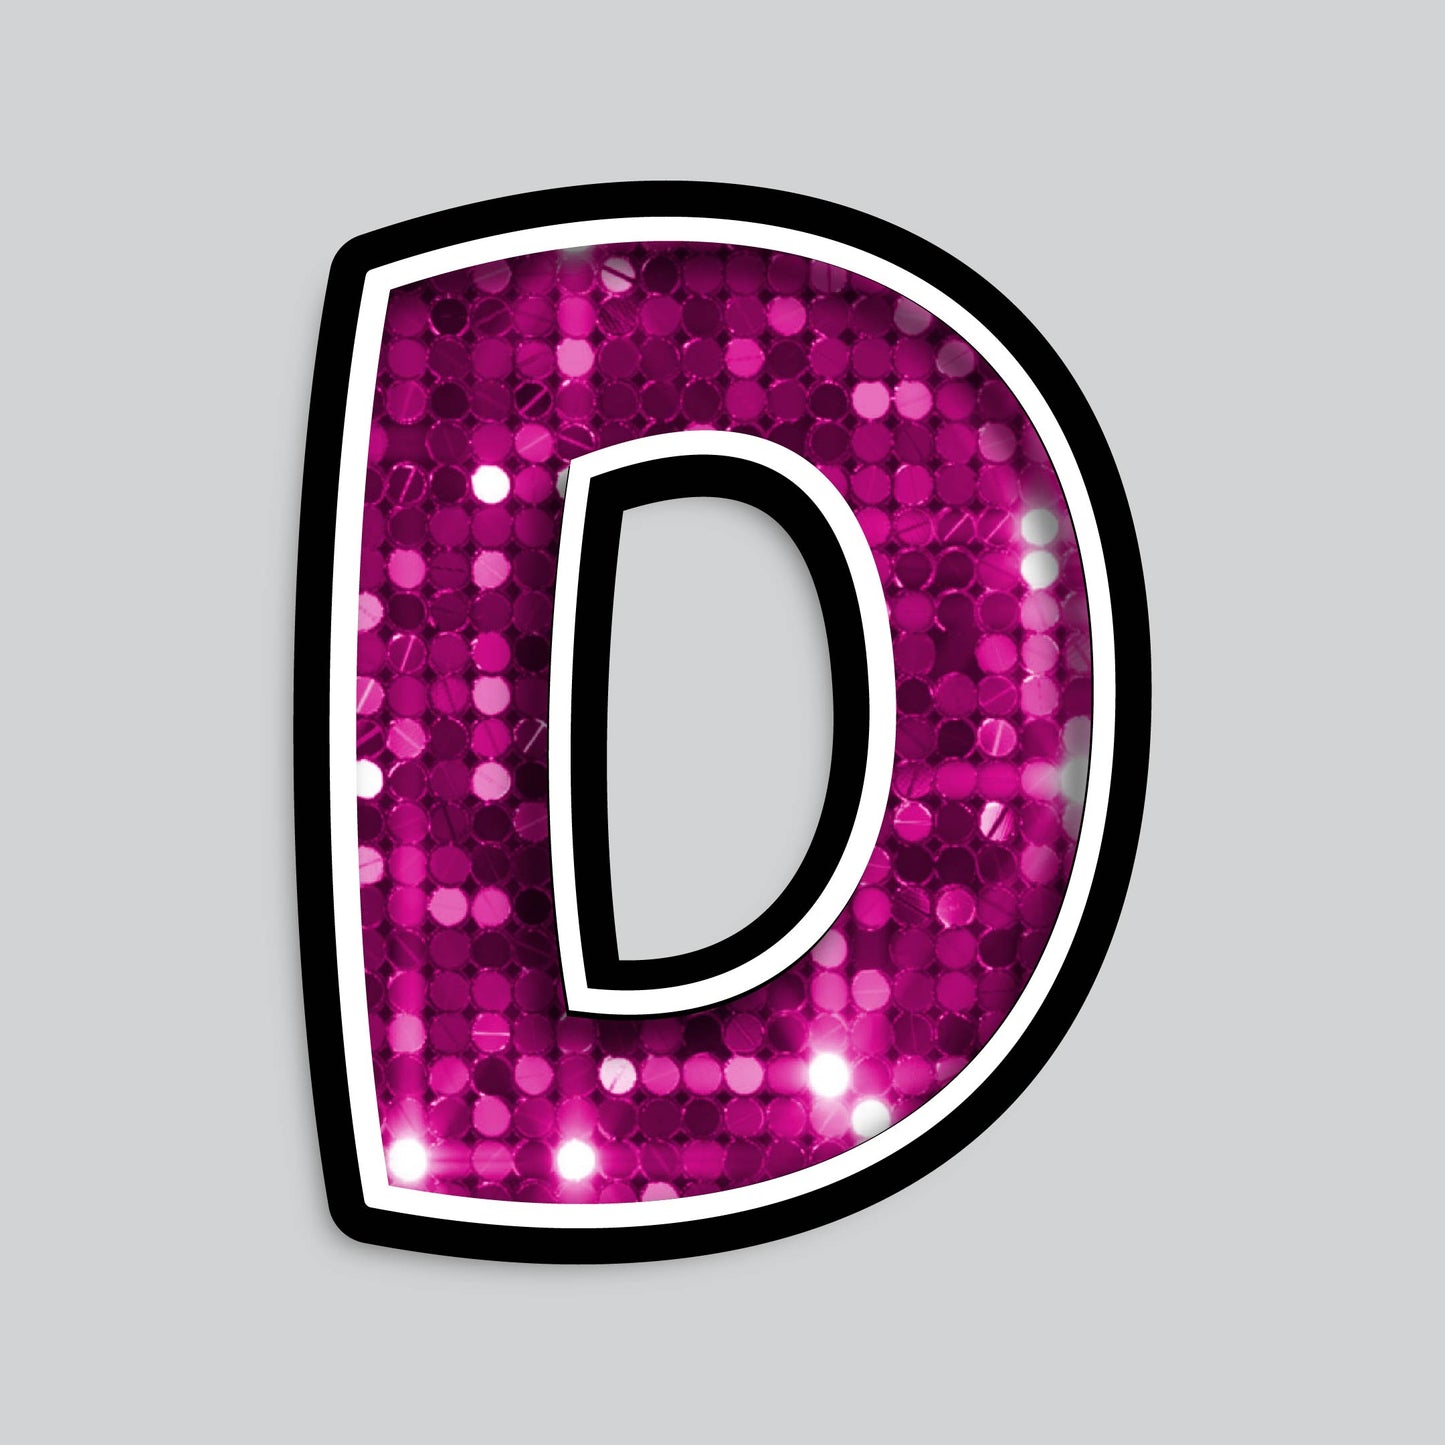 23.5” INDIVIDUAL BOUNCY PINK SEQUIN SHADOW LETTERS